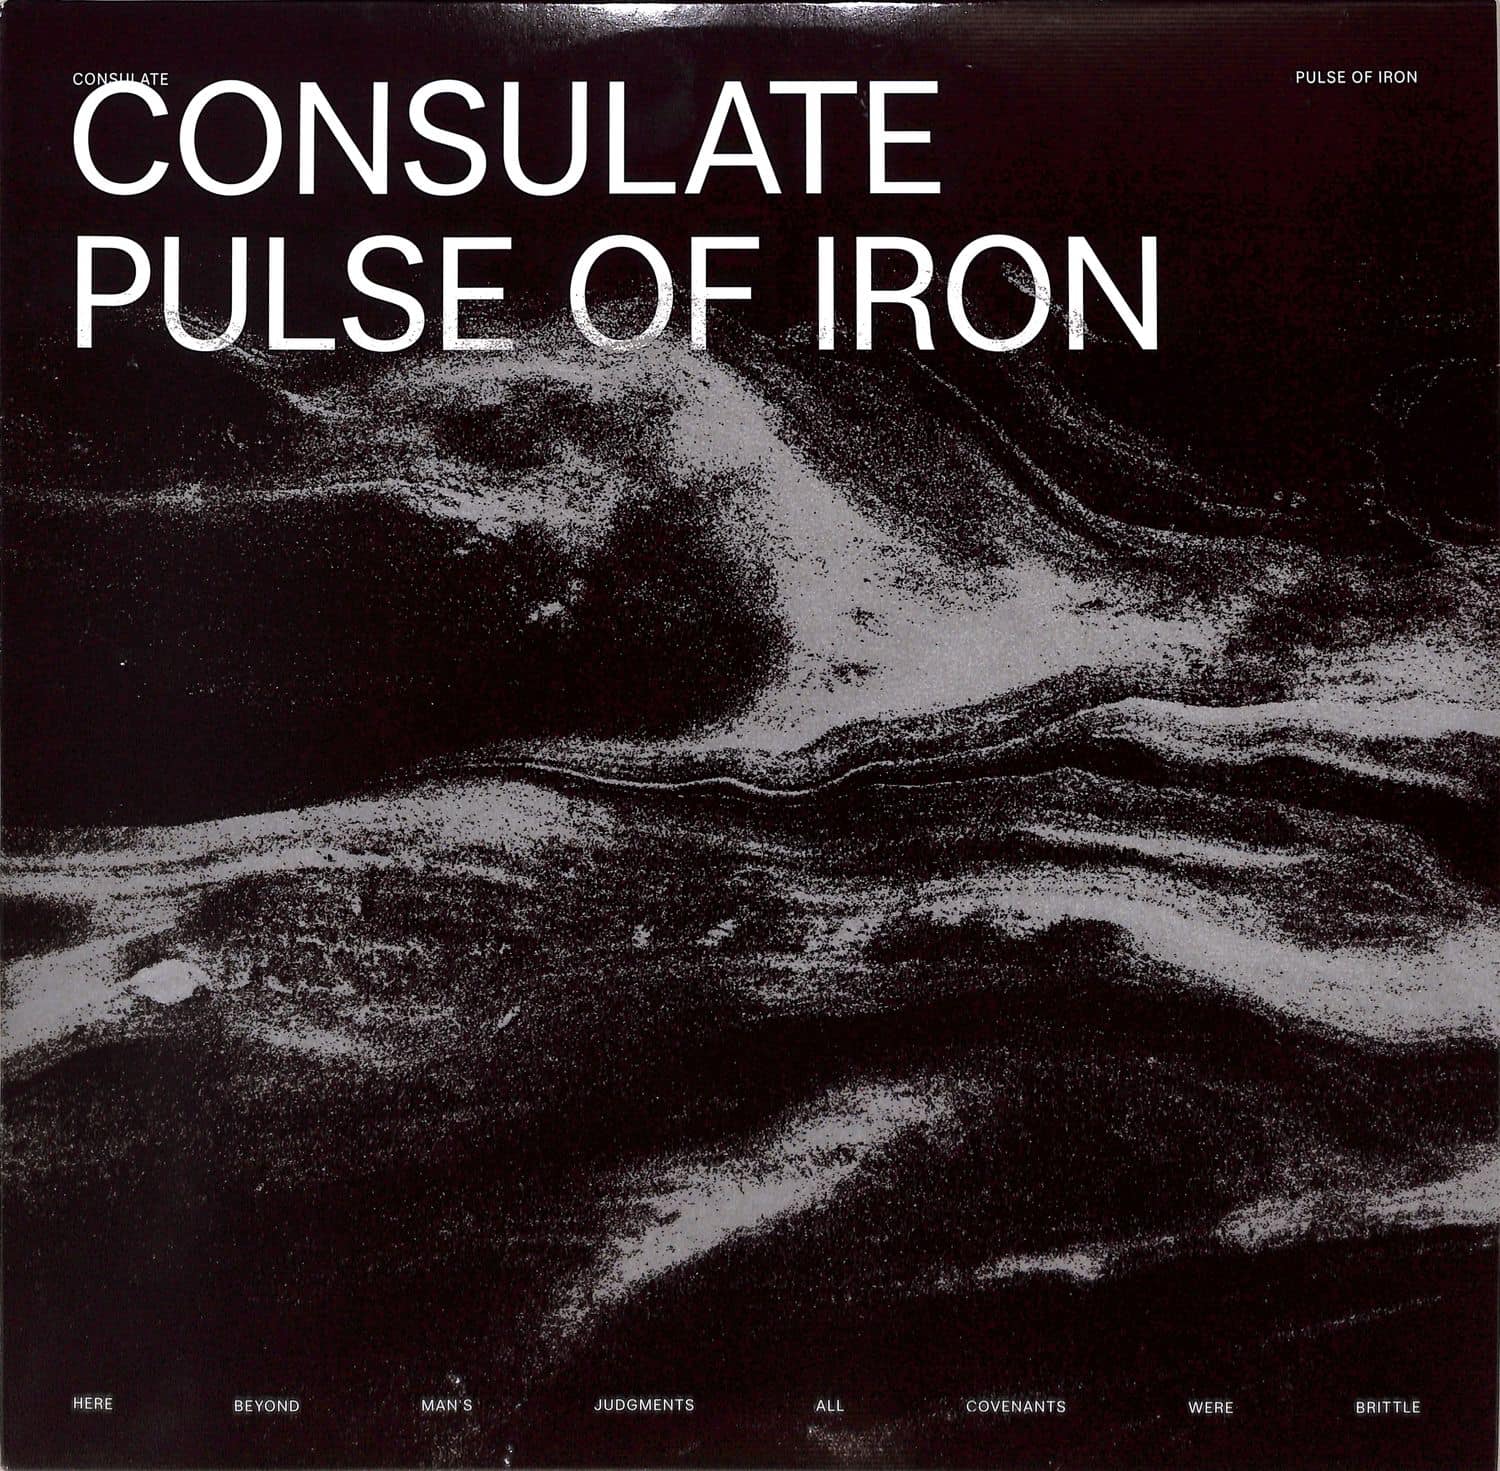 Consulate - THE PULSE OF IRON